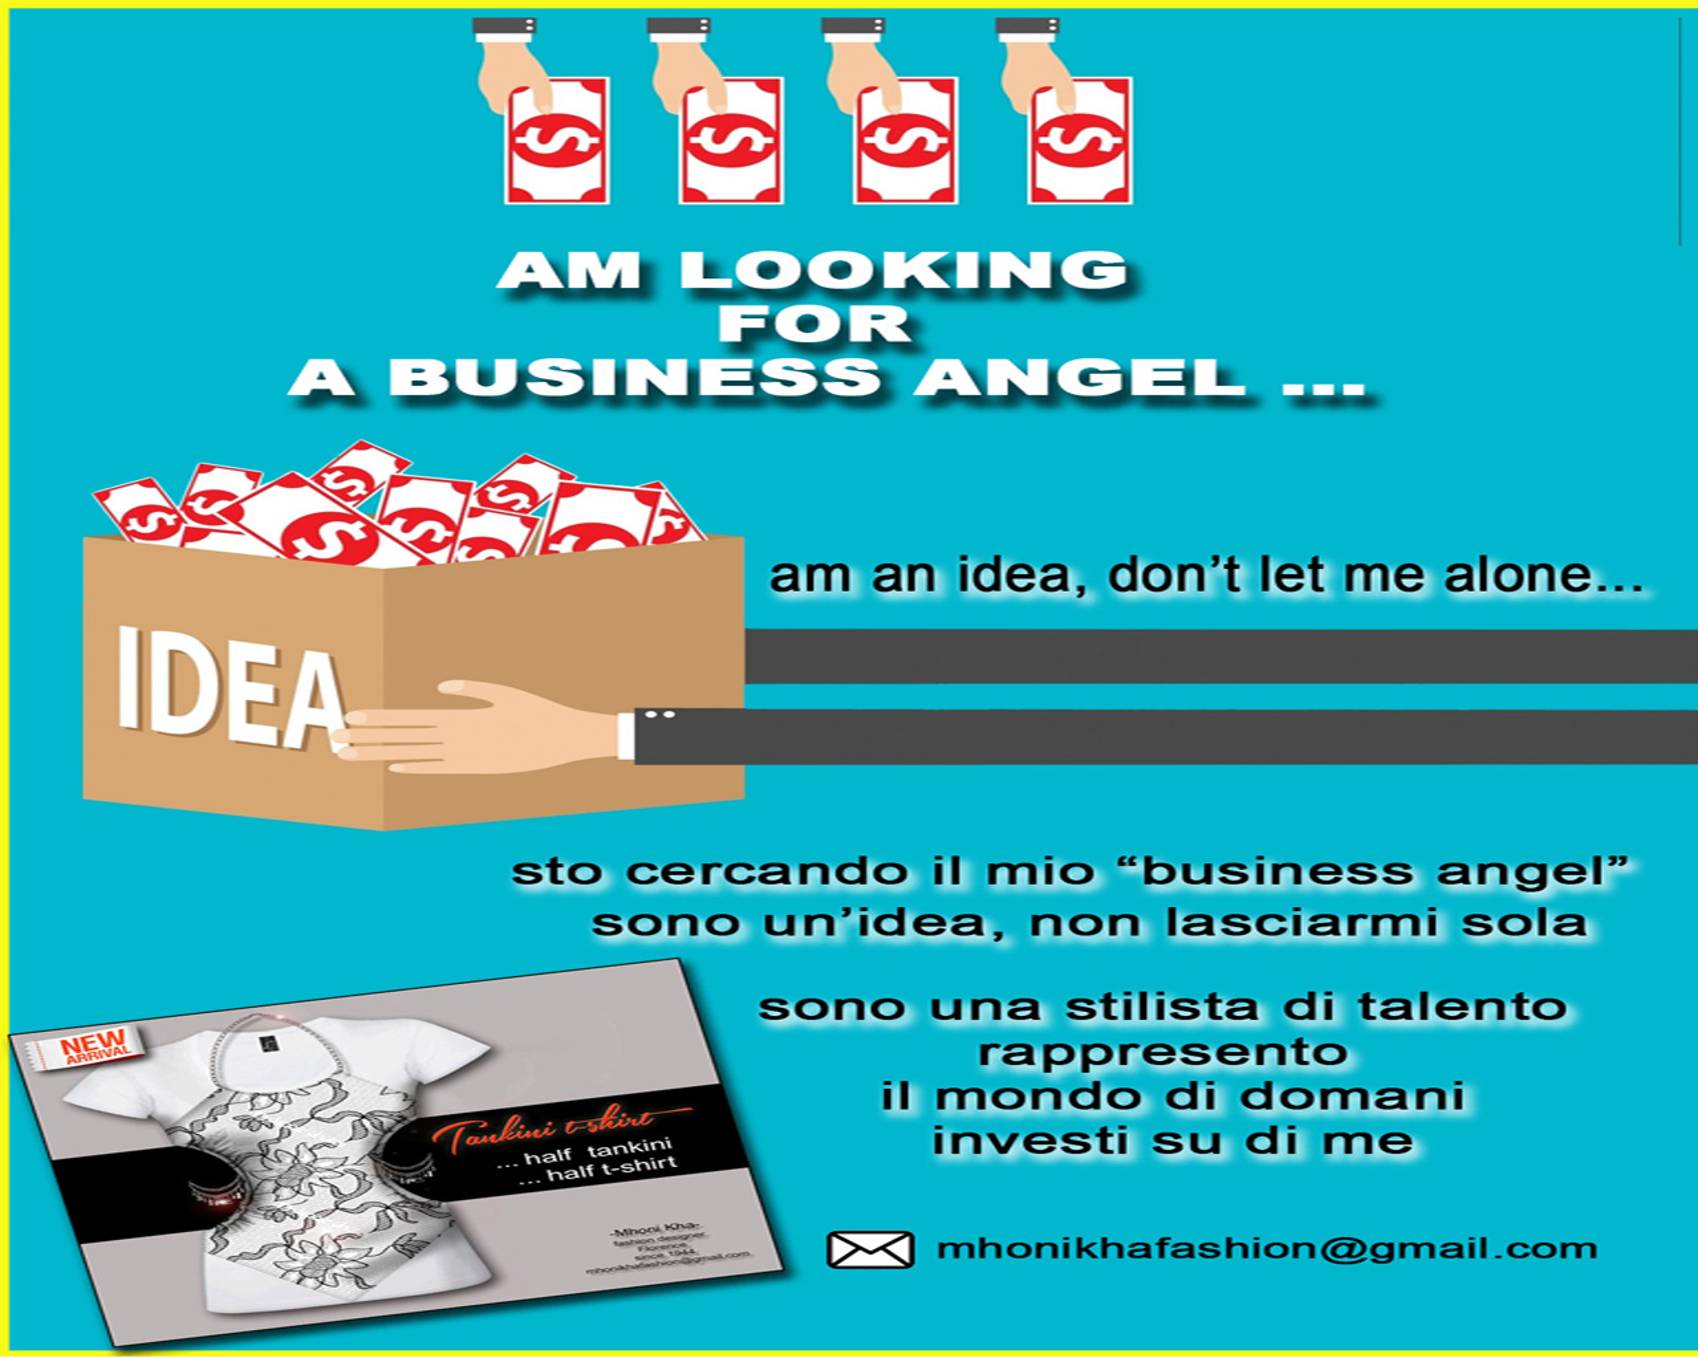 AM LOOKING FOR AN BUSINESS ANGEL...